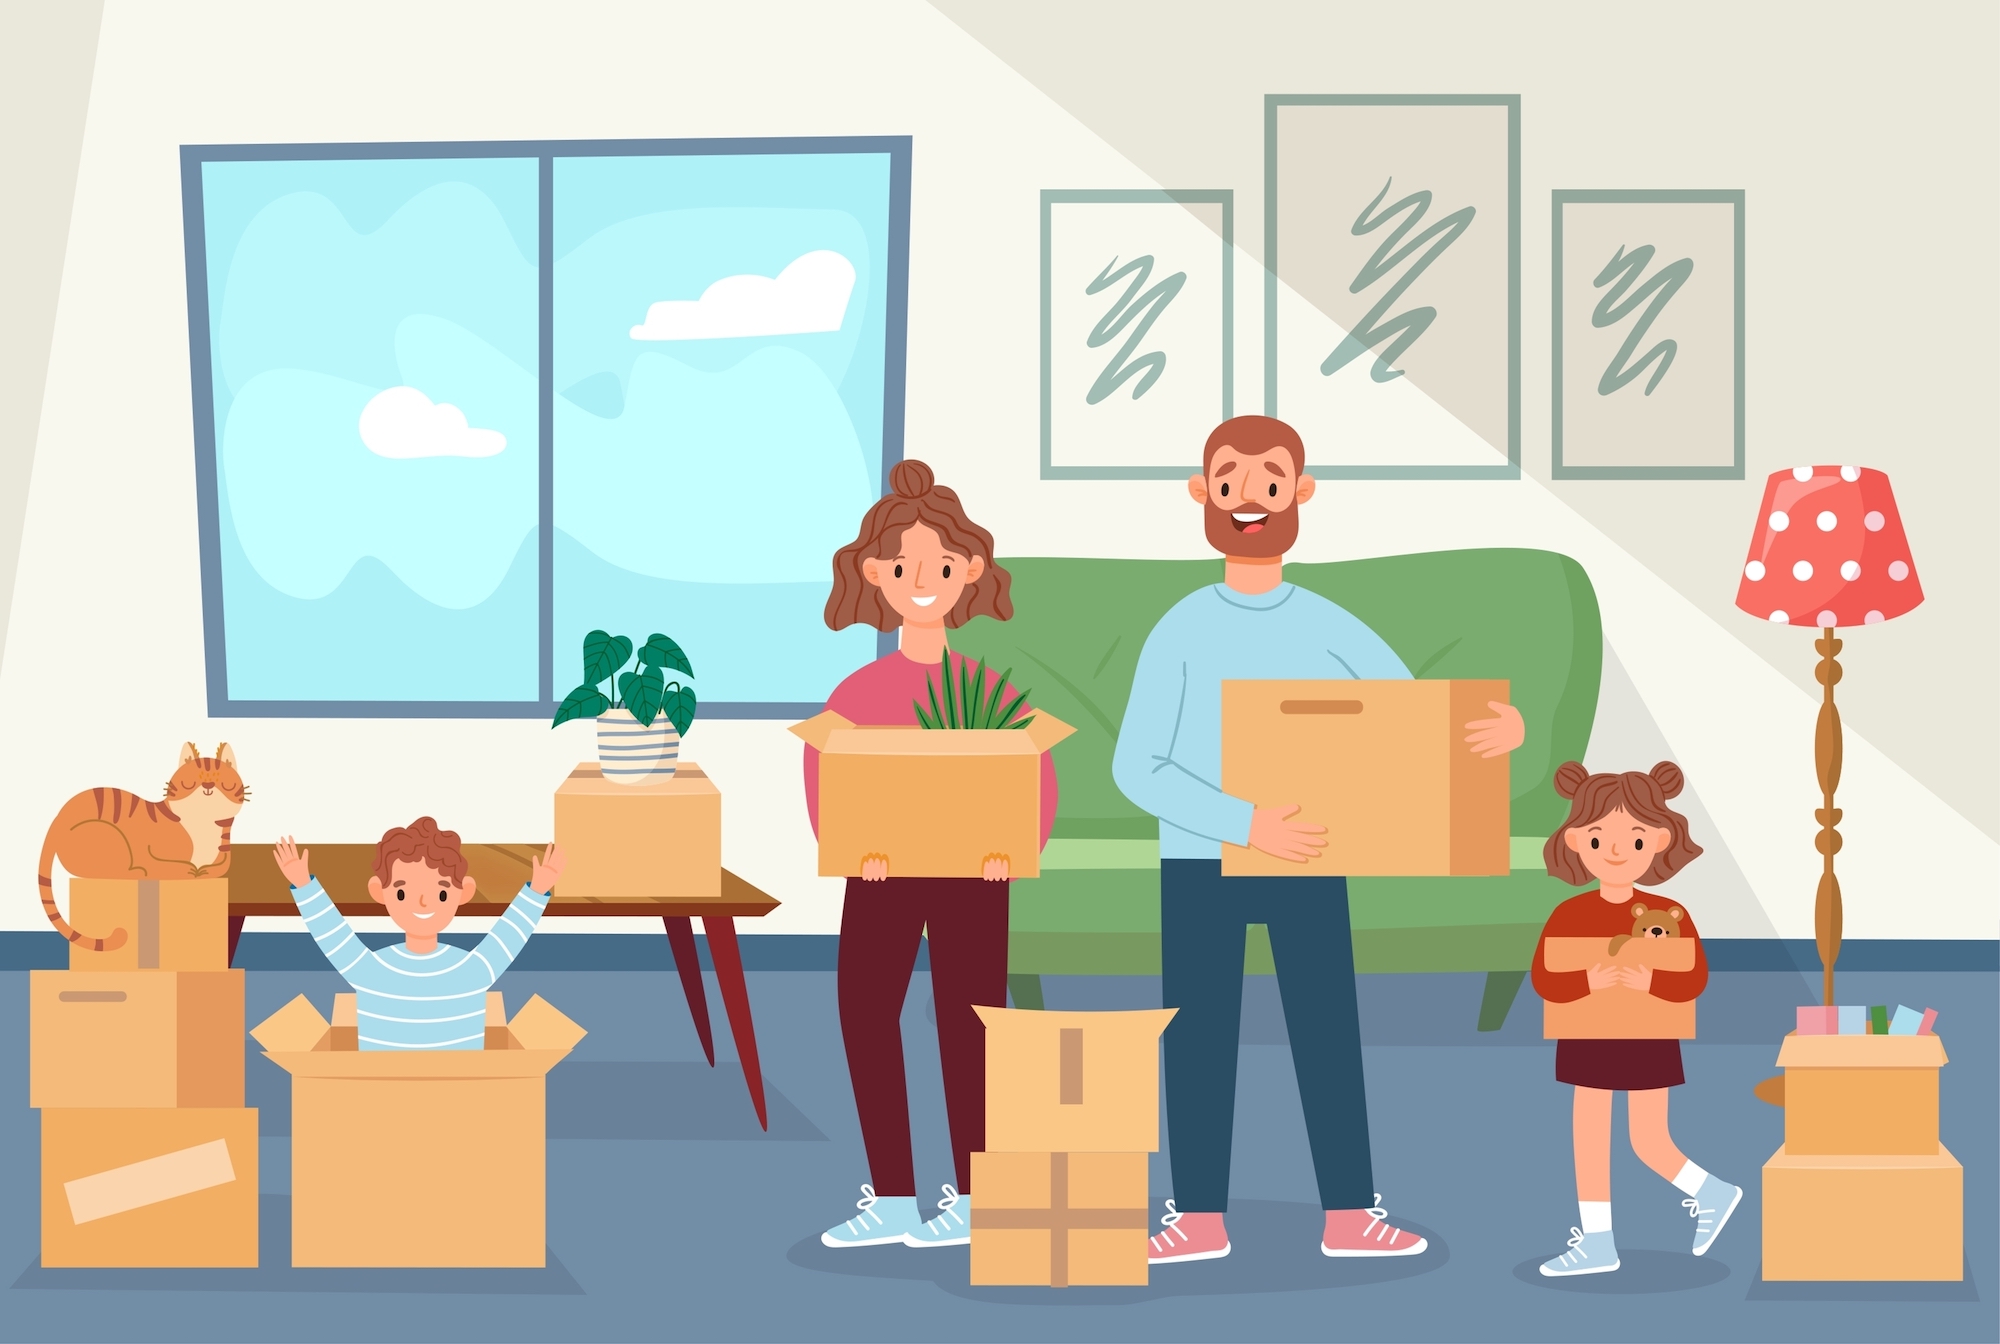 <20 Tips for Downsizing to a Smaller House With Children>